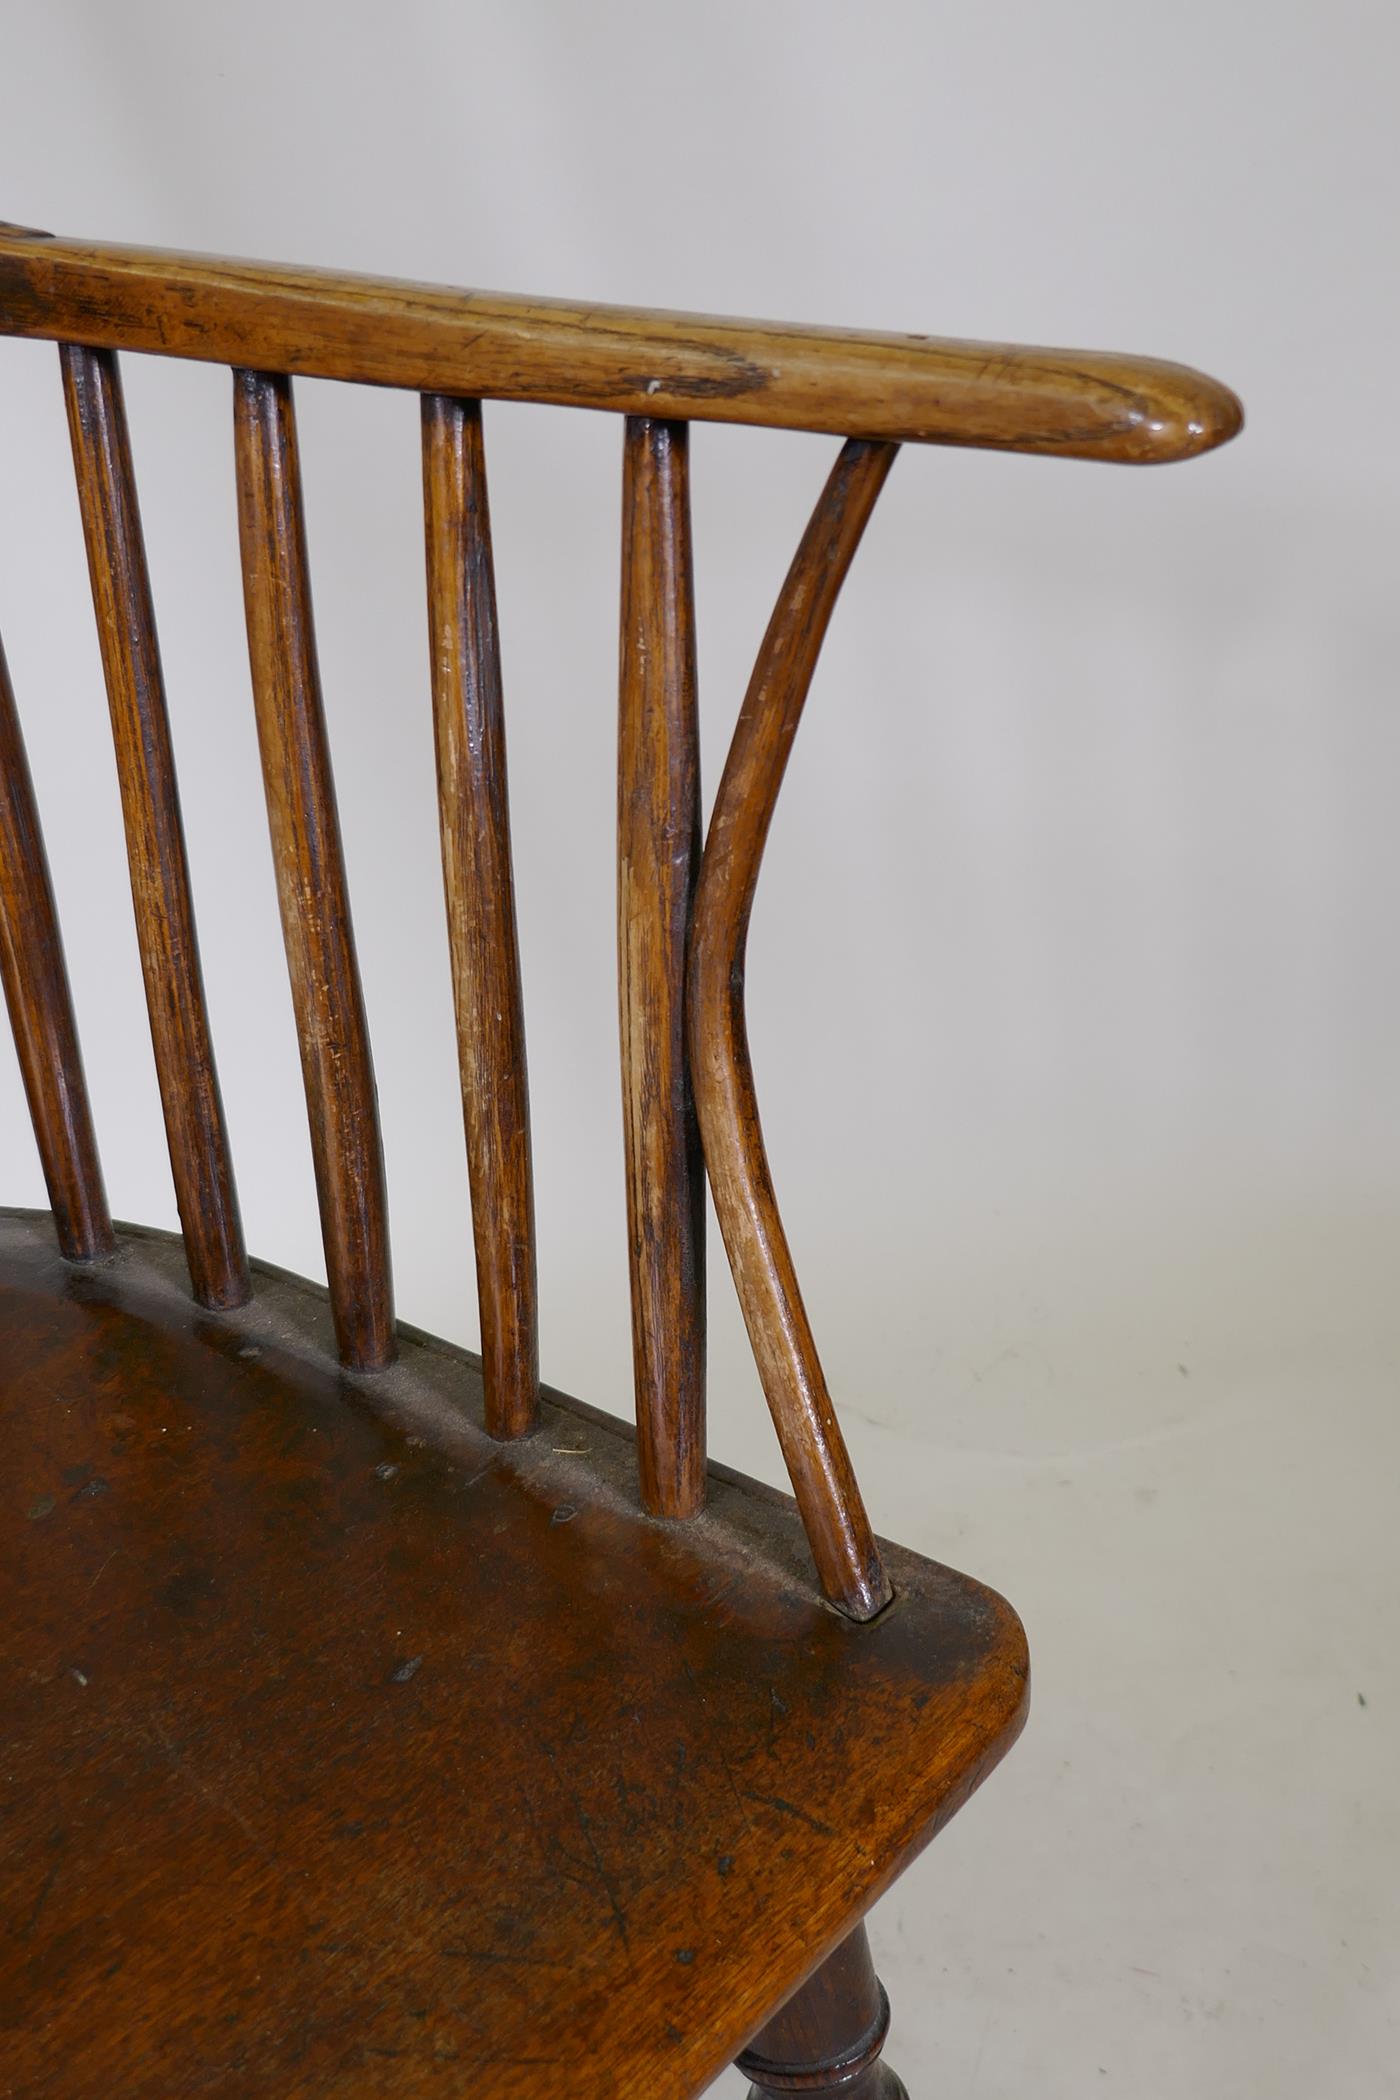 Early C19th Windsor comb back elbow chair with crinoline stretcher, raised on turned supports - Image 5 of 5